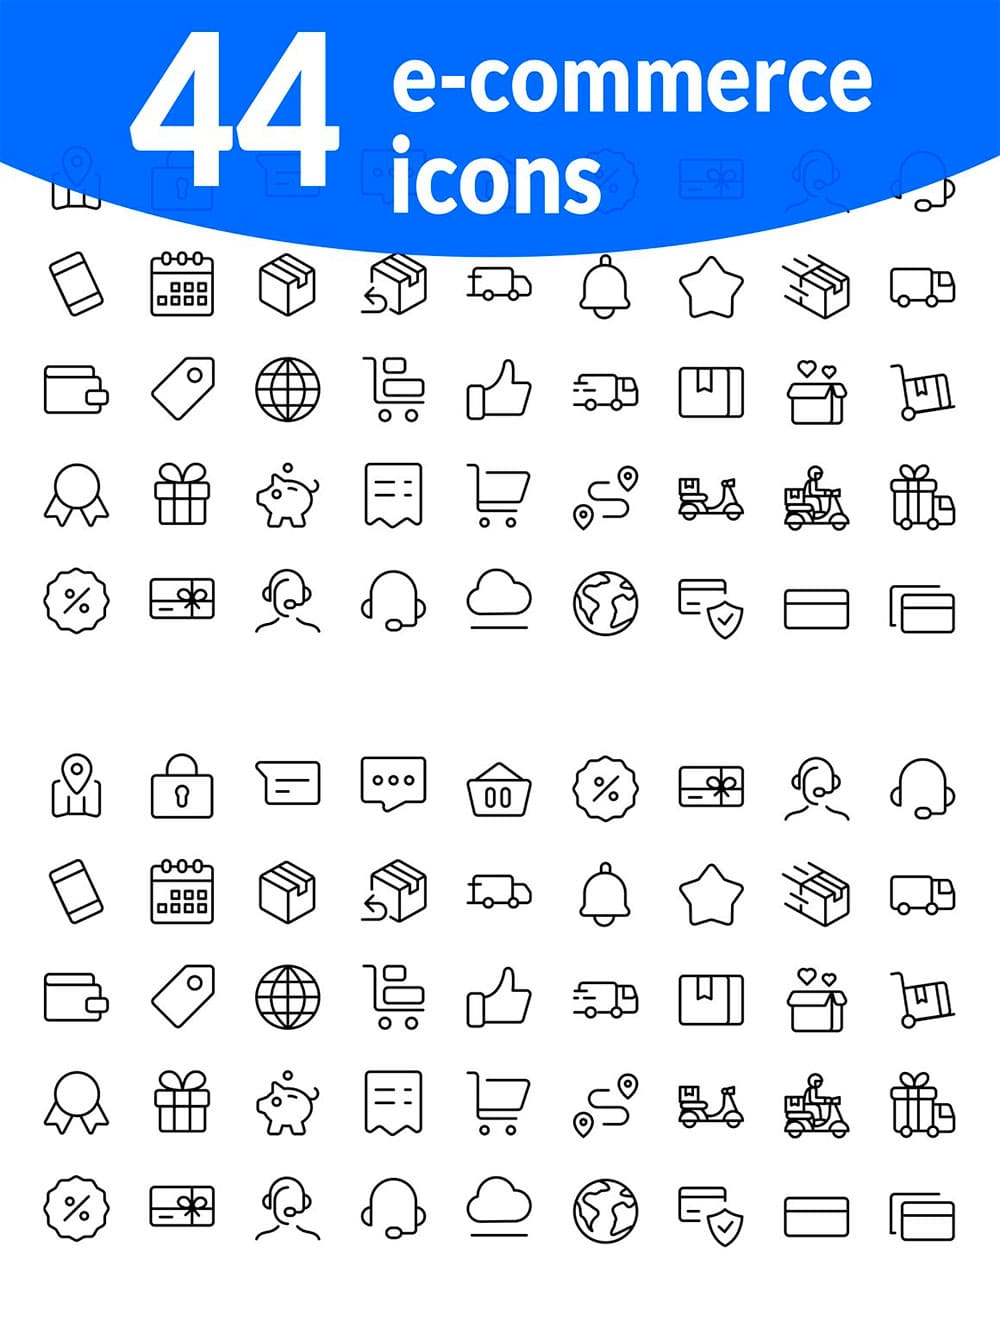 44 shoping and e-commerce icons, picture for pinterest.